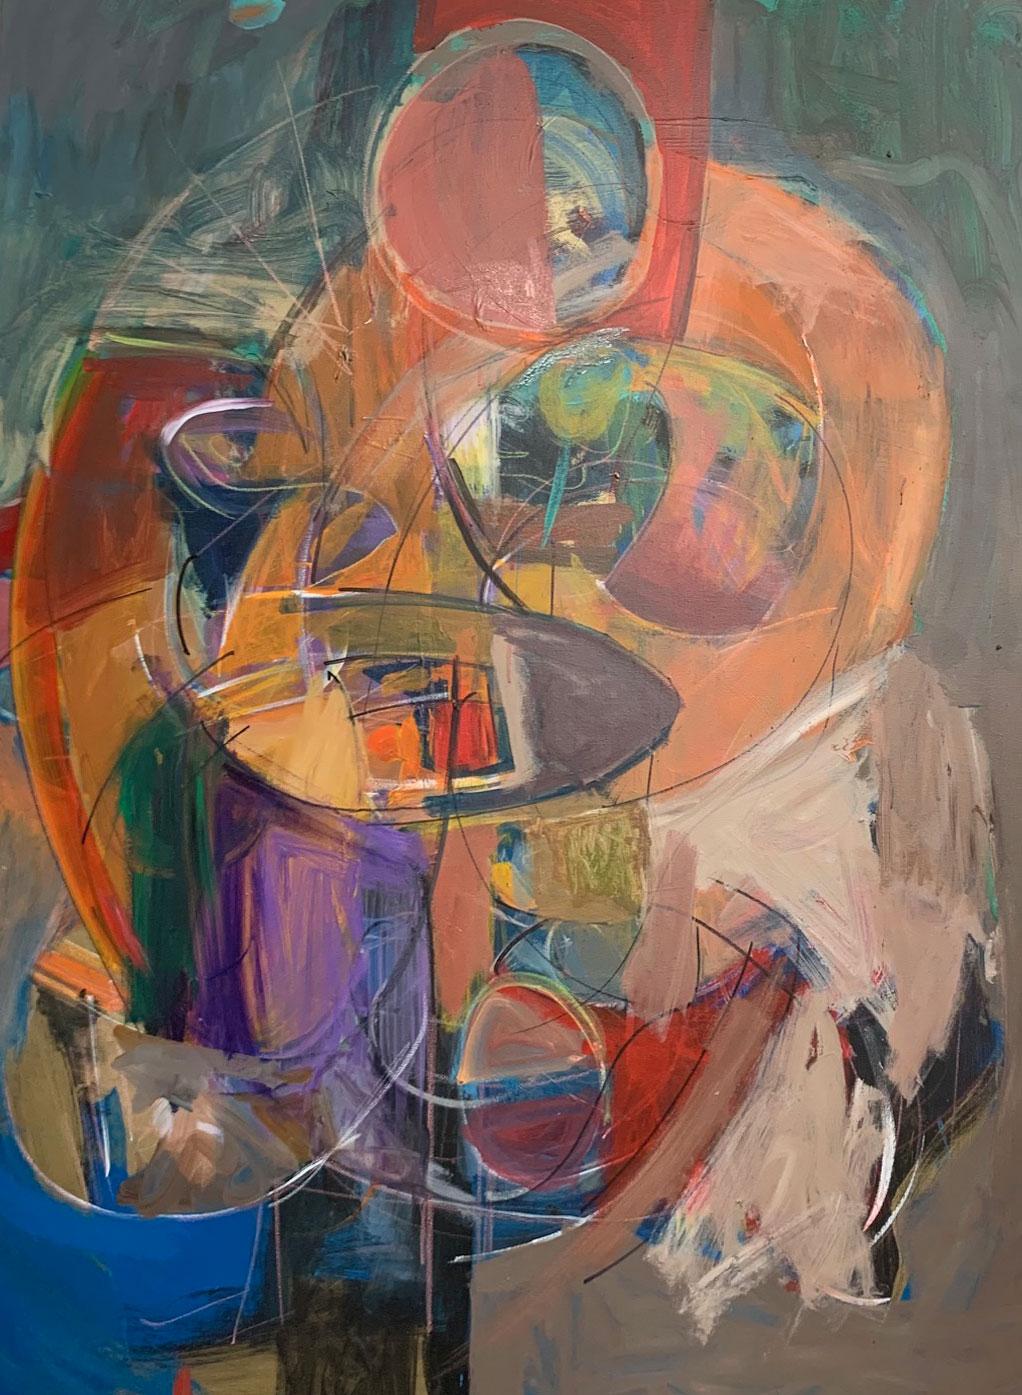 Frank Shifreen
Seated Woman
2021
48 x 30 inches 
Acrylic on Canvas
Signed, titled and dated on verso

These new works start from polar opposite impulses which juxtapose the purity and beauty of platonic forms opposed to impulsive muscular